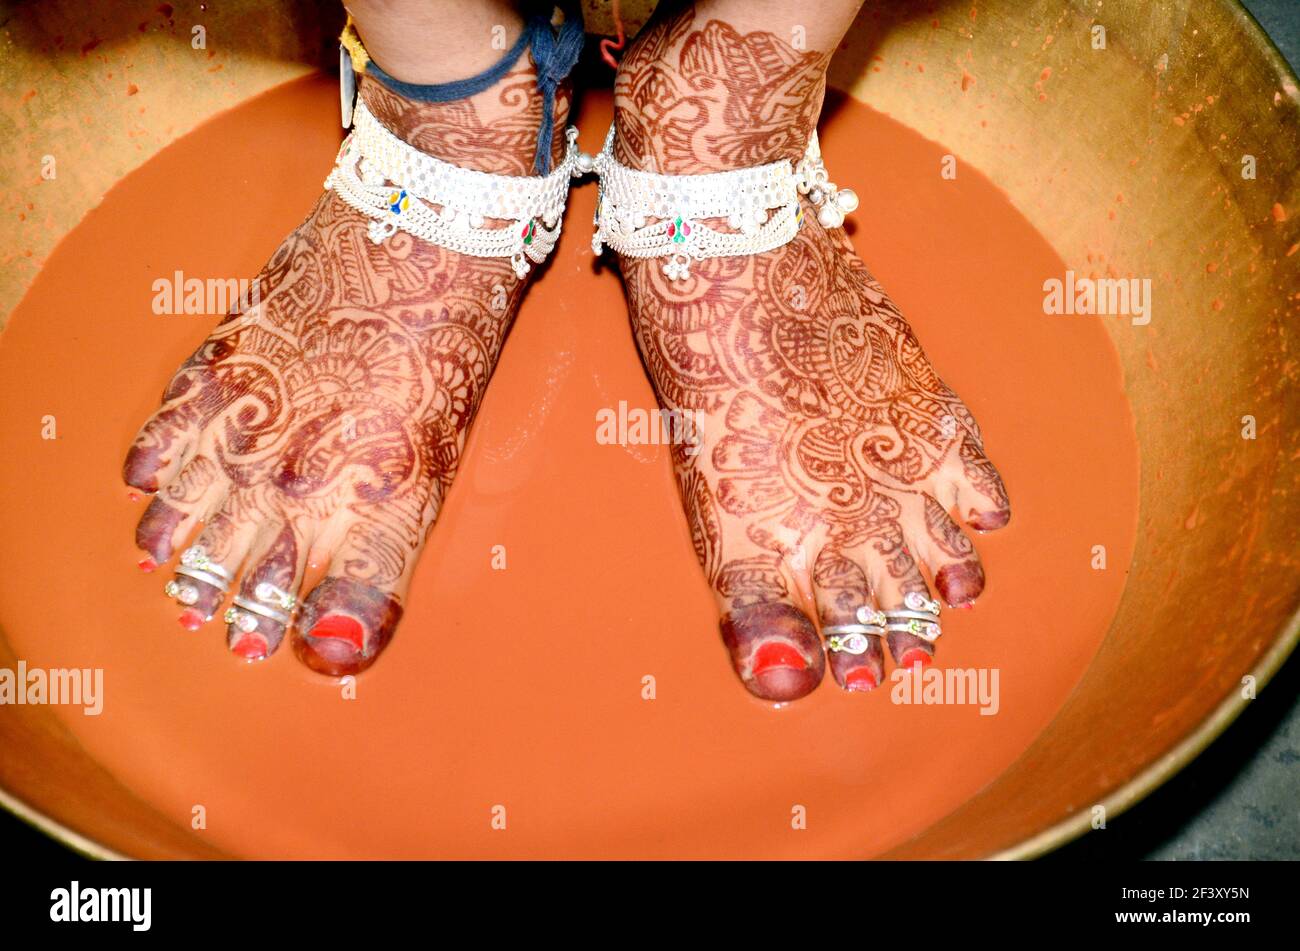 Griha Pravesh Ritual - Right feet of a Newly married Indian Hindu bride in Saree stepping in a plate filled with liquid kumkum before entering house f Stock Photo